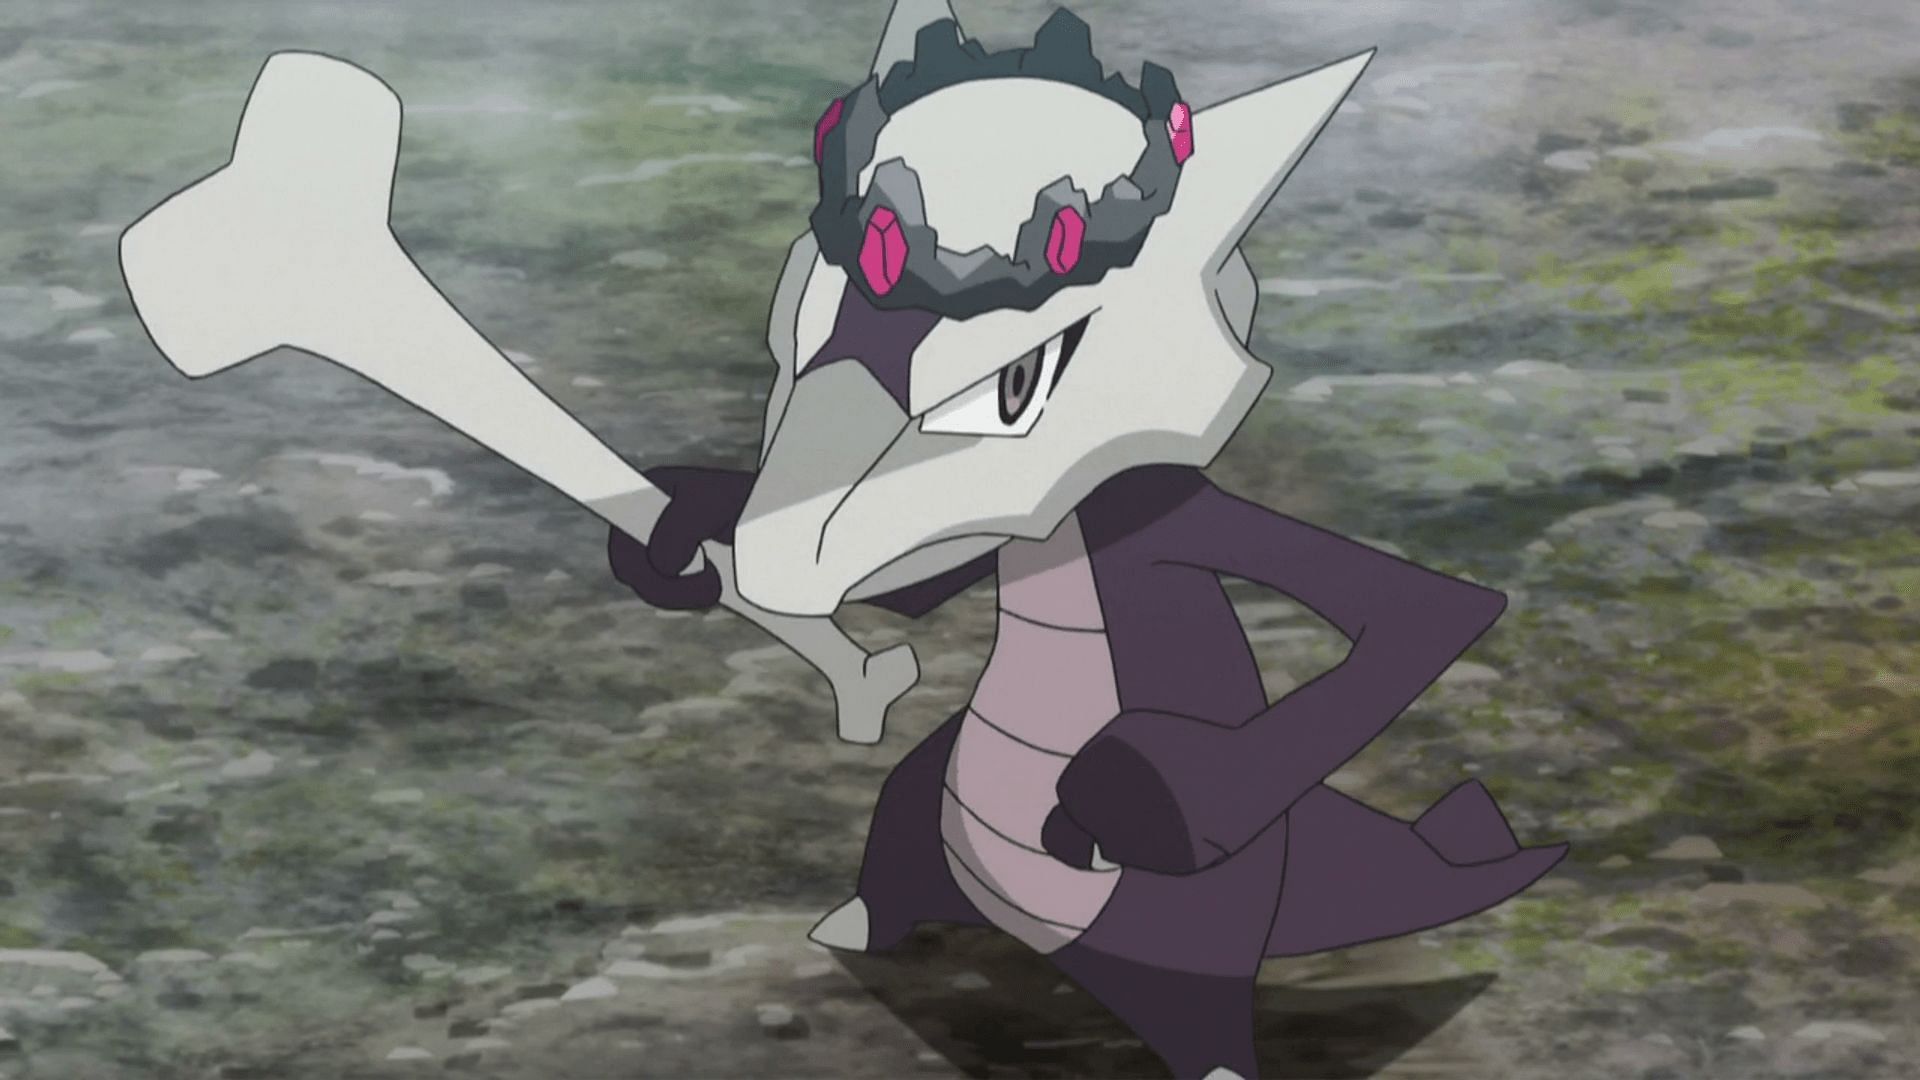 While Alolan Marowak is a Ghost and Fire-type, the standard &quot;Kantonian&quot; Marowak is a Ground-type (Image via The Pokemon Company)